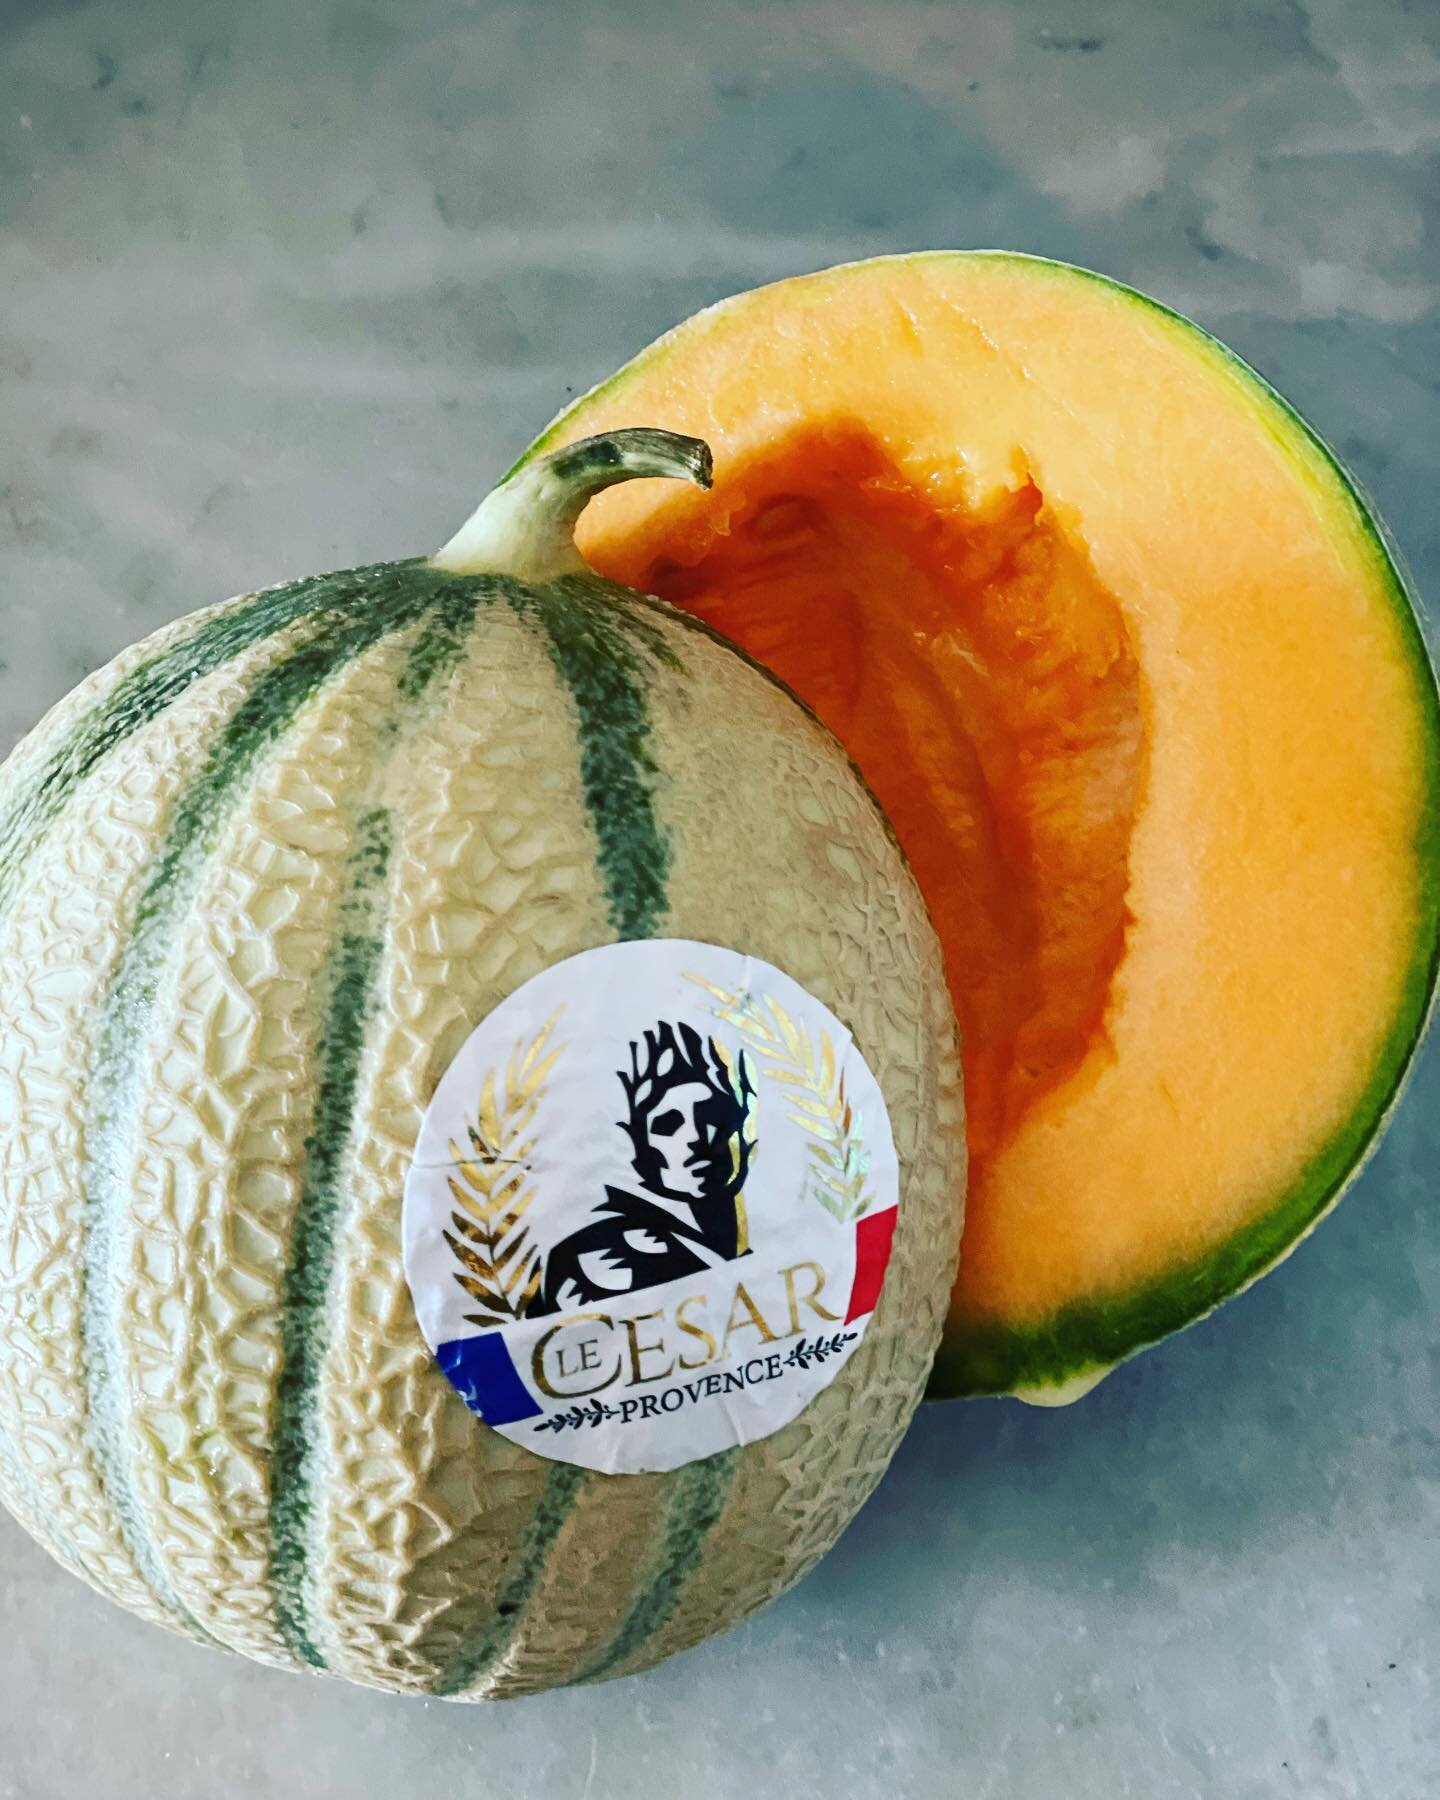 My provencal melon story ~

A few days ago we received a delivery in almost 40 c heat. The 2 men struggled gallantly up narrow curved steps. I thought I should reward them with a cold drink and decided to give them some melon I had just sliced as wel